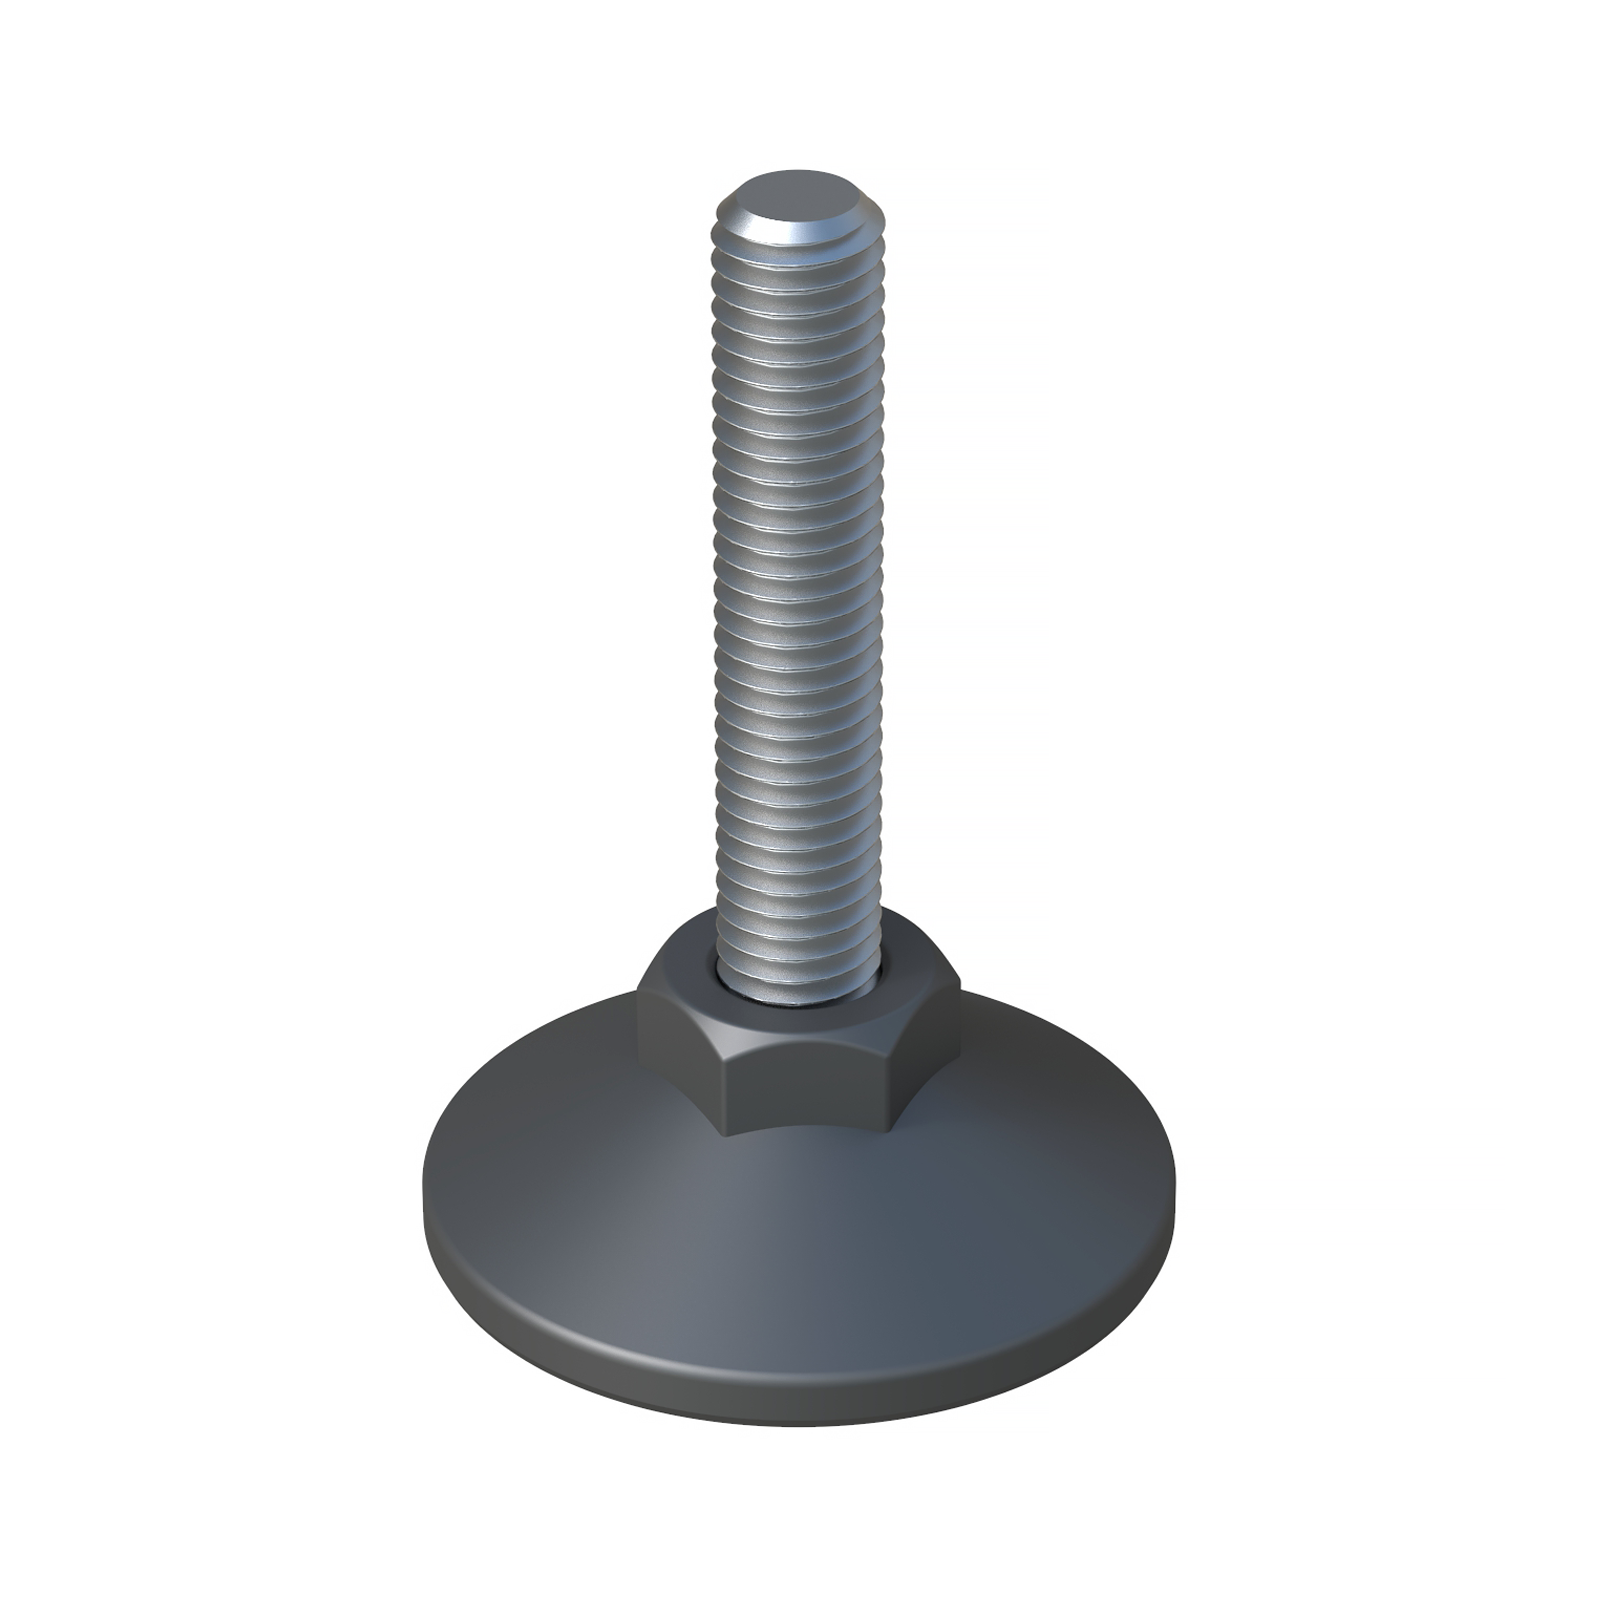 Our adjustable foot has a decorative round base.